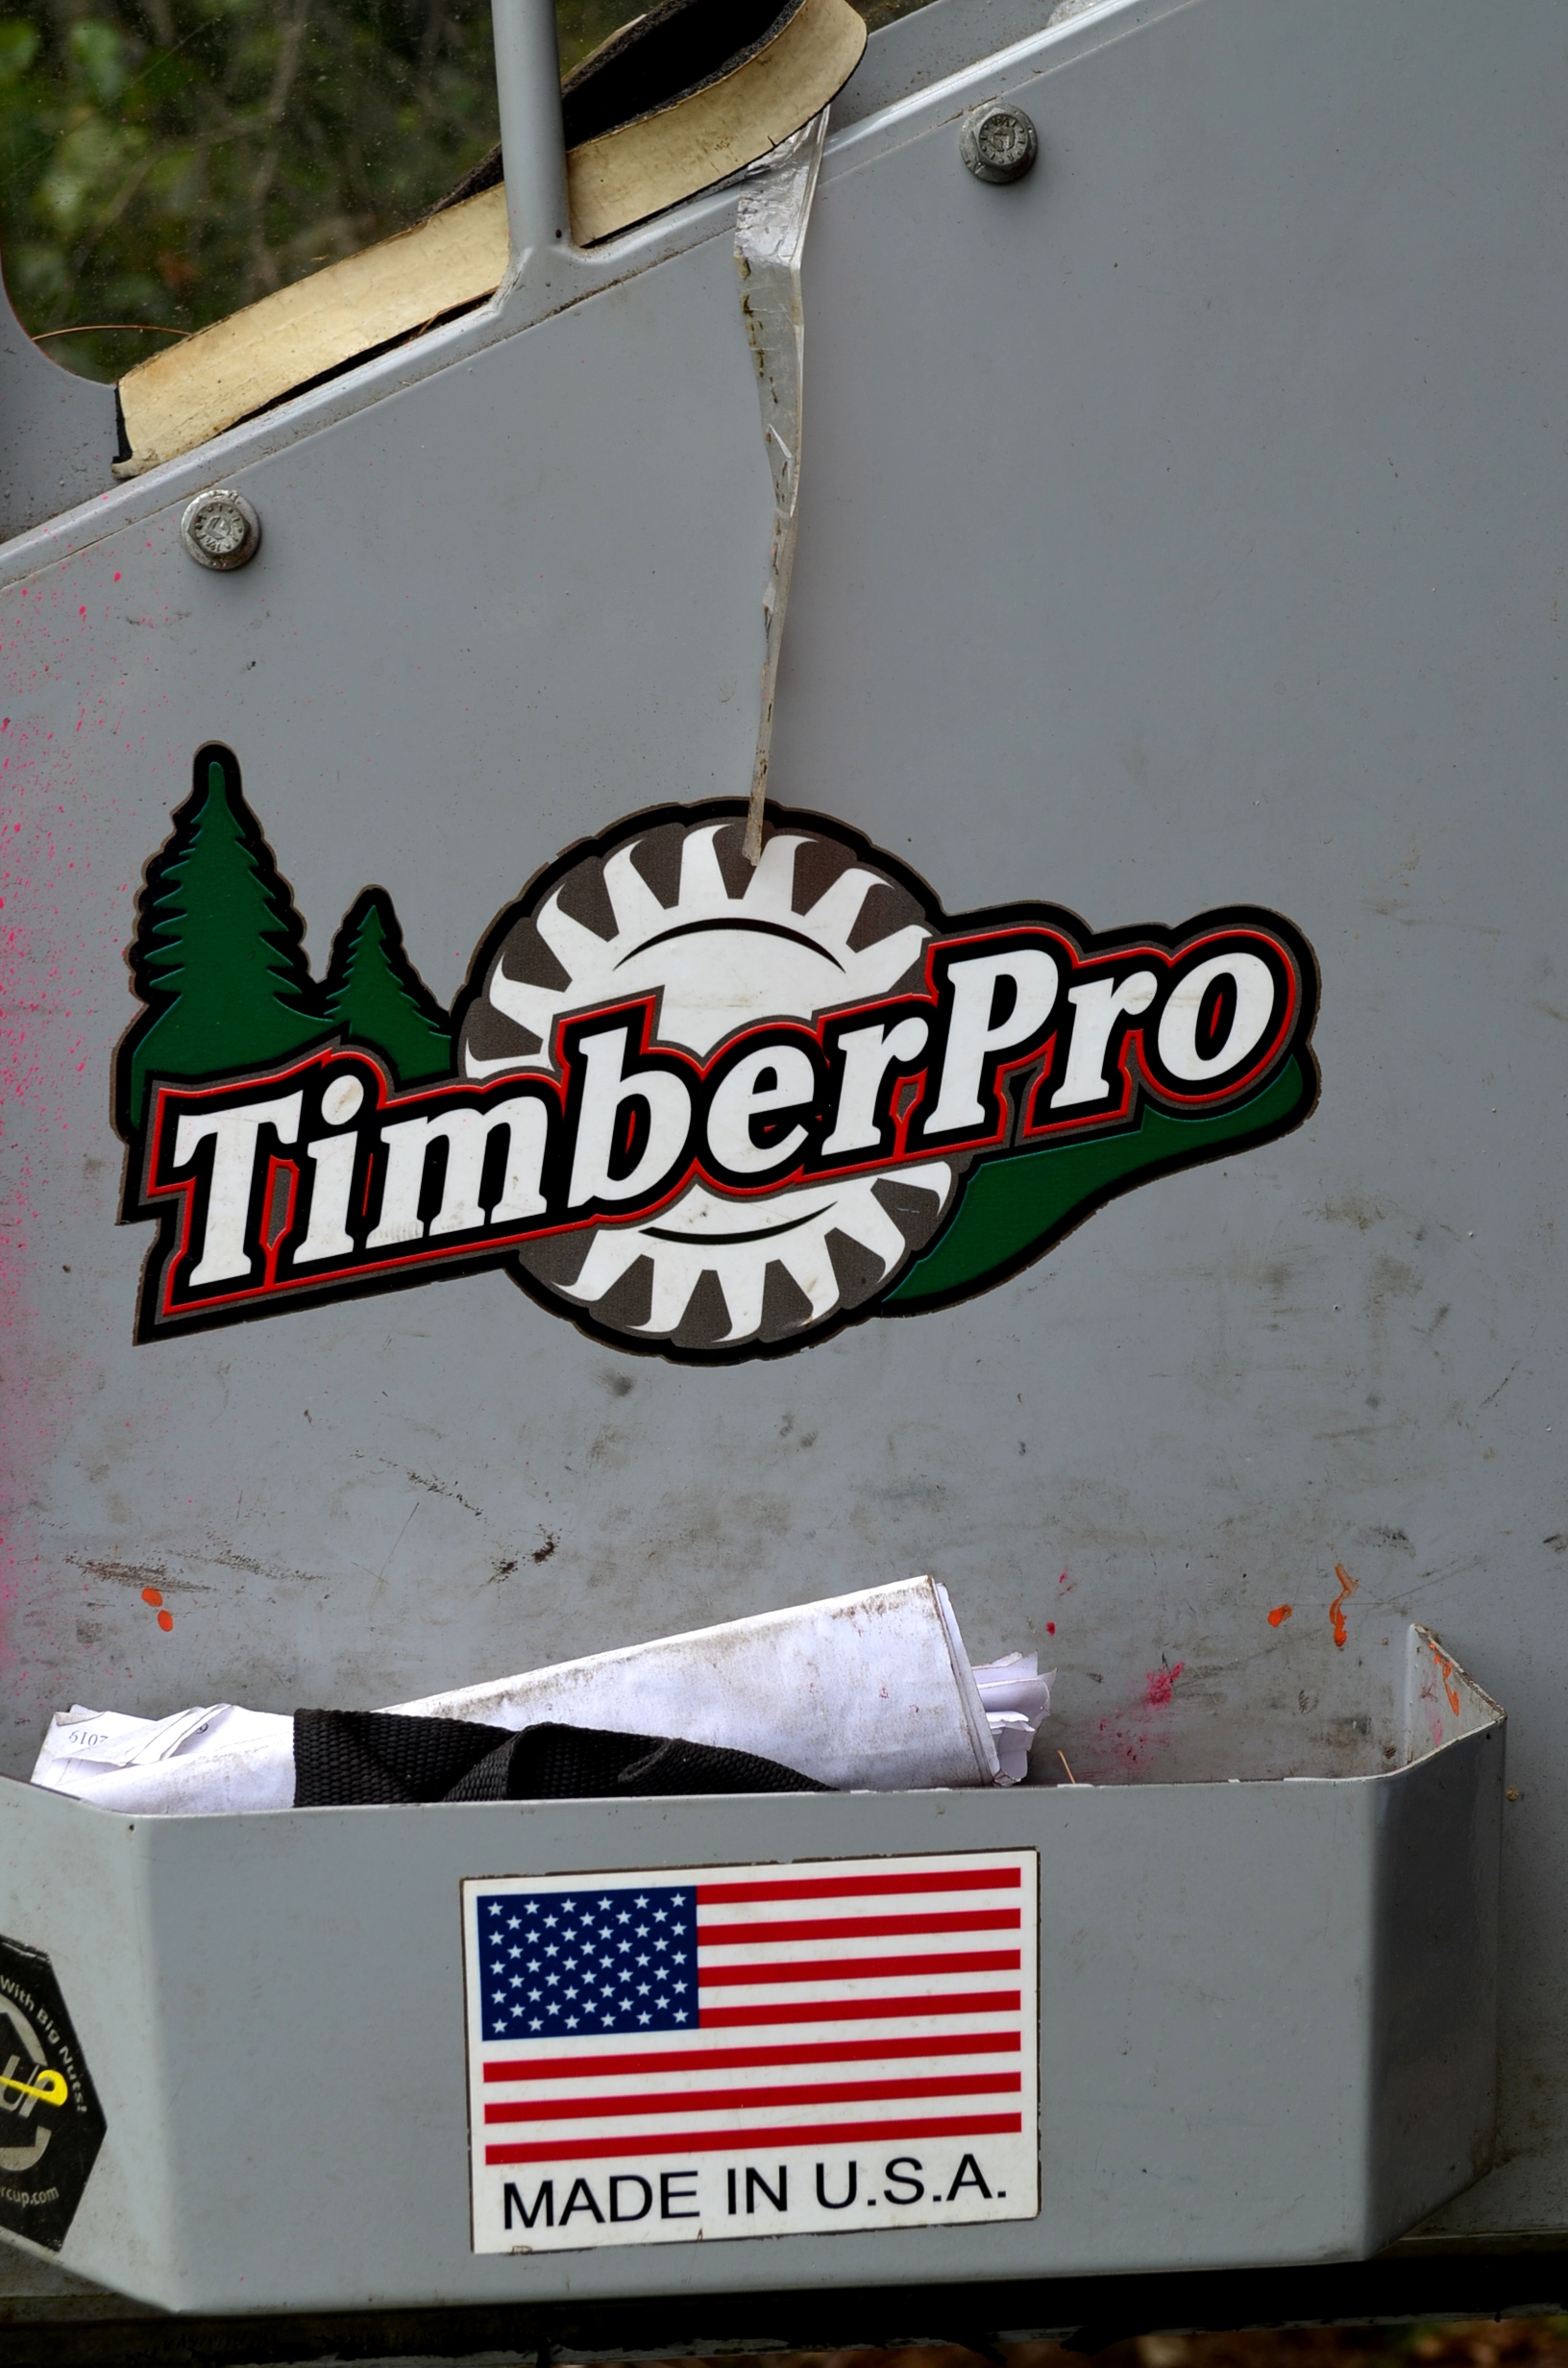 TimberPro - Made in the USA